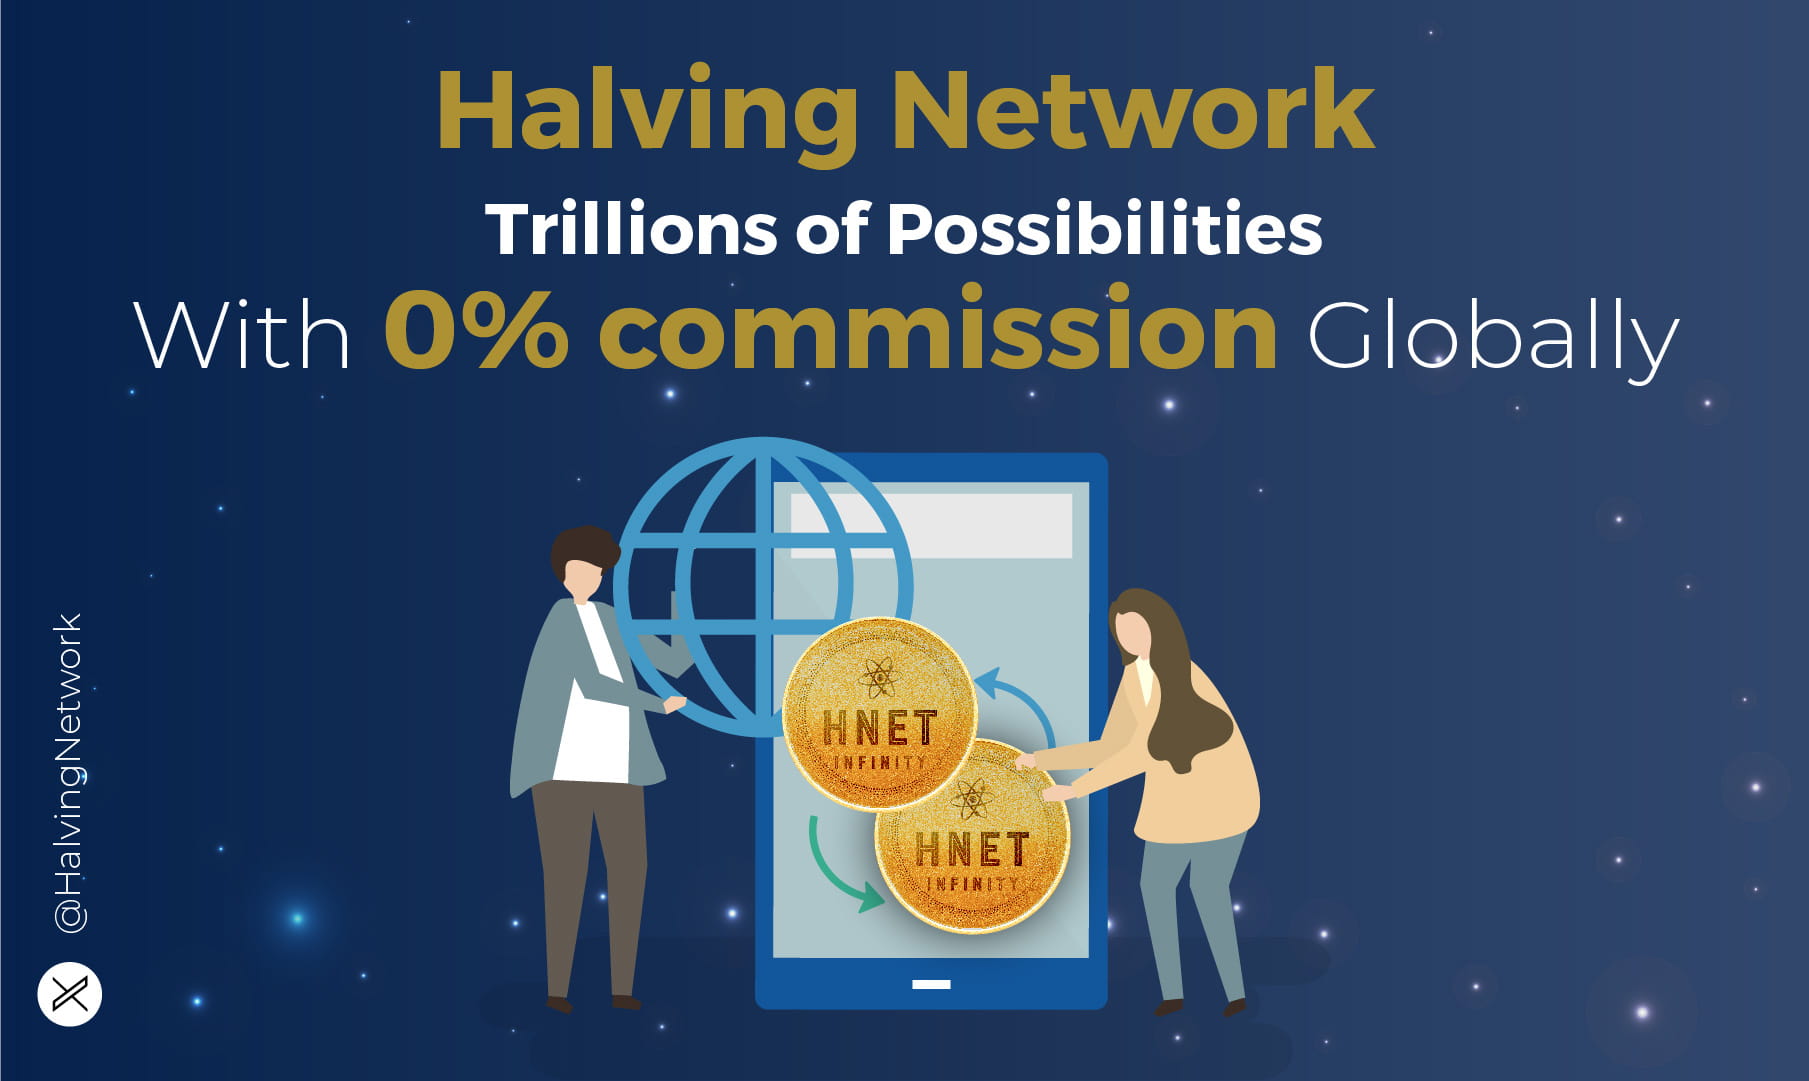 Halving Network Trillions of Possibilities